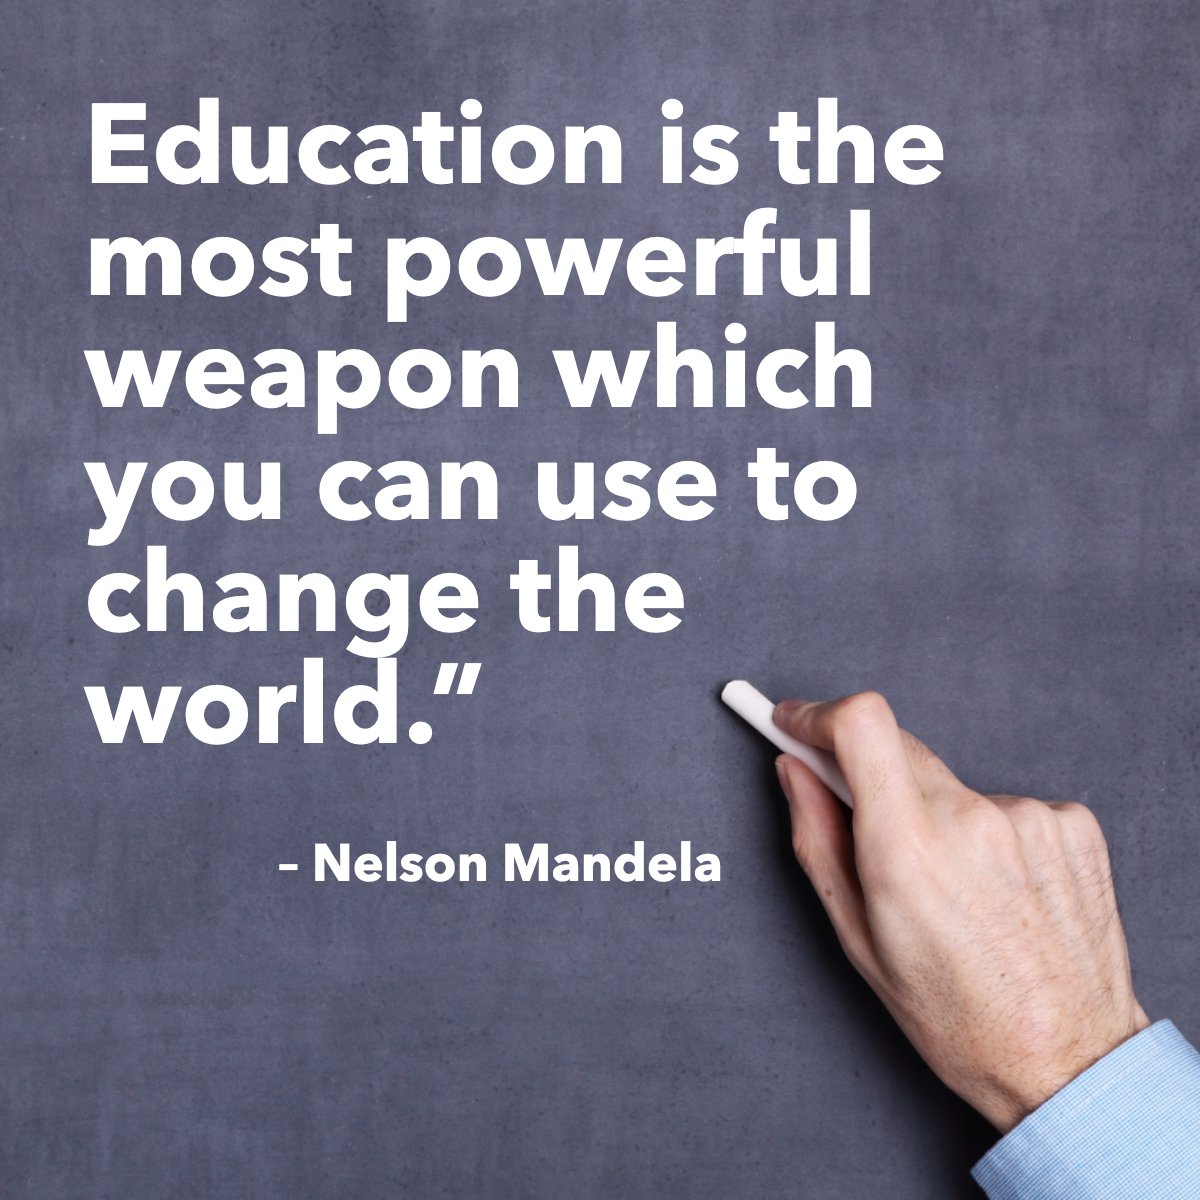 'Education is the most powerful weapon which you can use to change the world' 
— Nelson Mandela  📖

#educationquotes #wisdomquote #wisdomoftheday #quotegram #quoteoftheday #nelsonmandela #educationispower
 #realestate #realtor #newhome #househunting #renatashomes